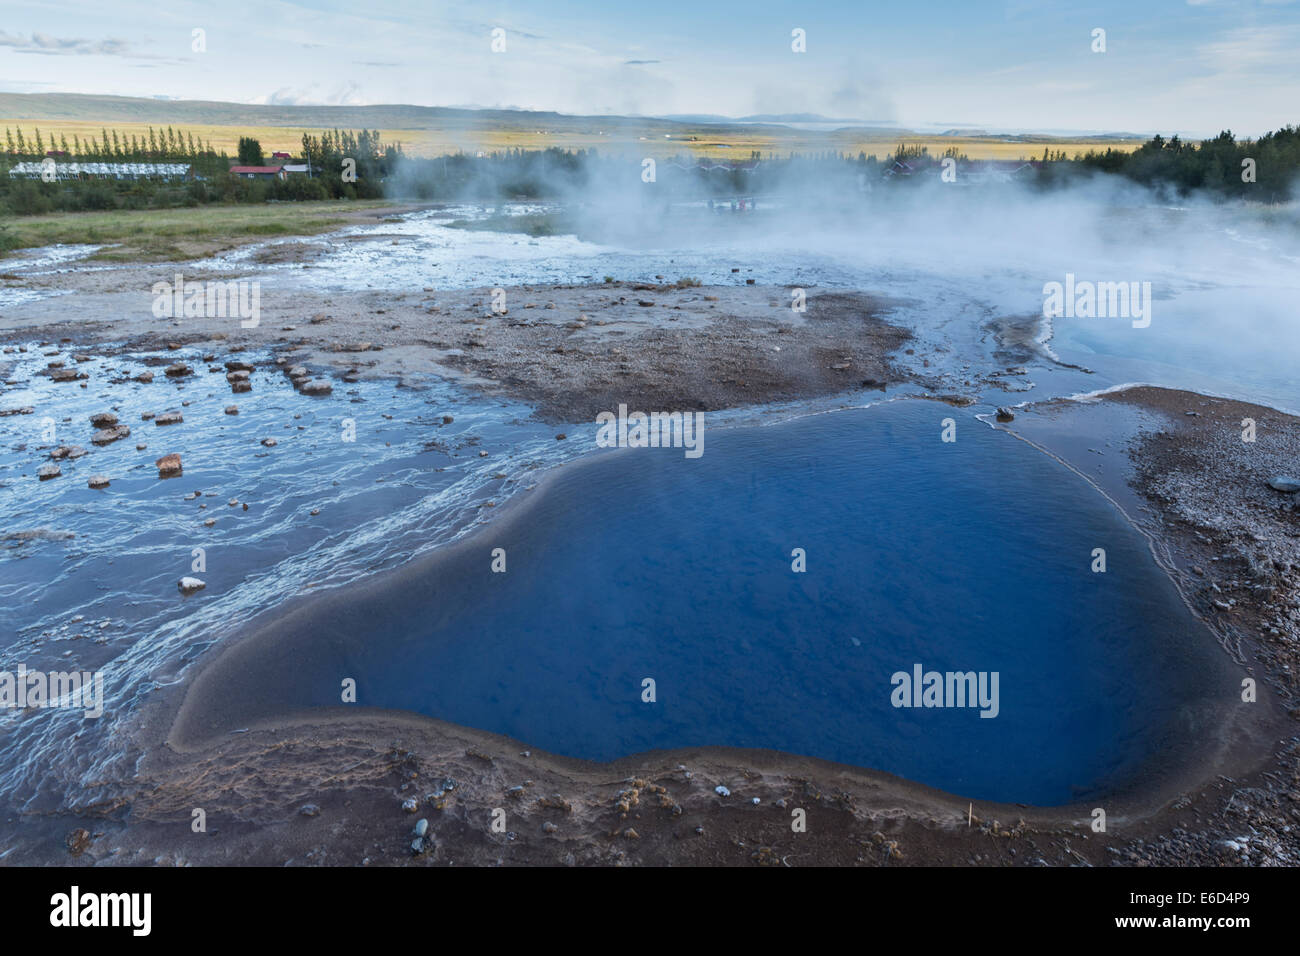 Bioluminescent, geothermal pool next to the Strokkur geyser, in Thingvellir National Park, Iceland. Stock Photo